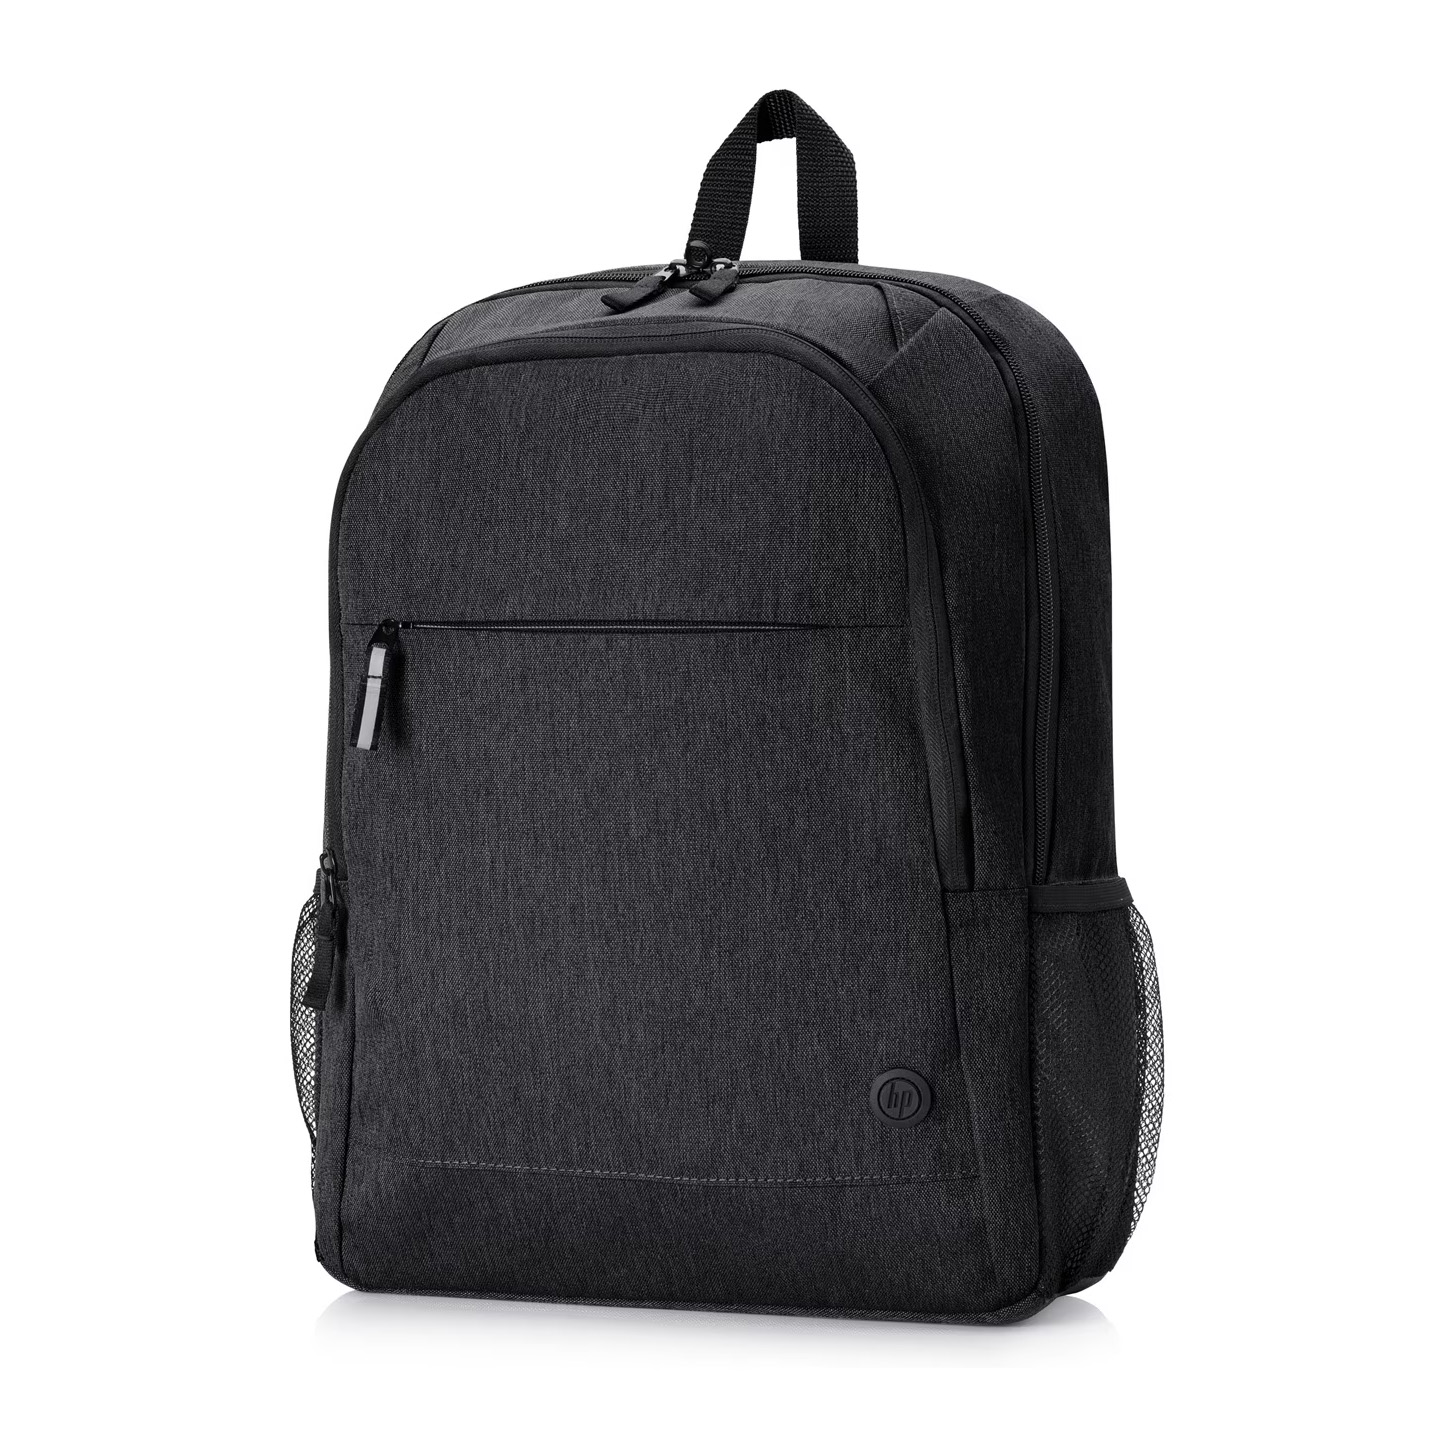 HP-1X644AA Commute with a stylish and durable backpack carefully designed with the environment in mind and made with recycled materials[1]. The HP Prelude Pro Recycled Backpack has onboard safety features so you can transport your devices to and from work and beyond with peace of mind.